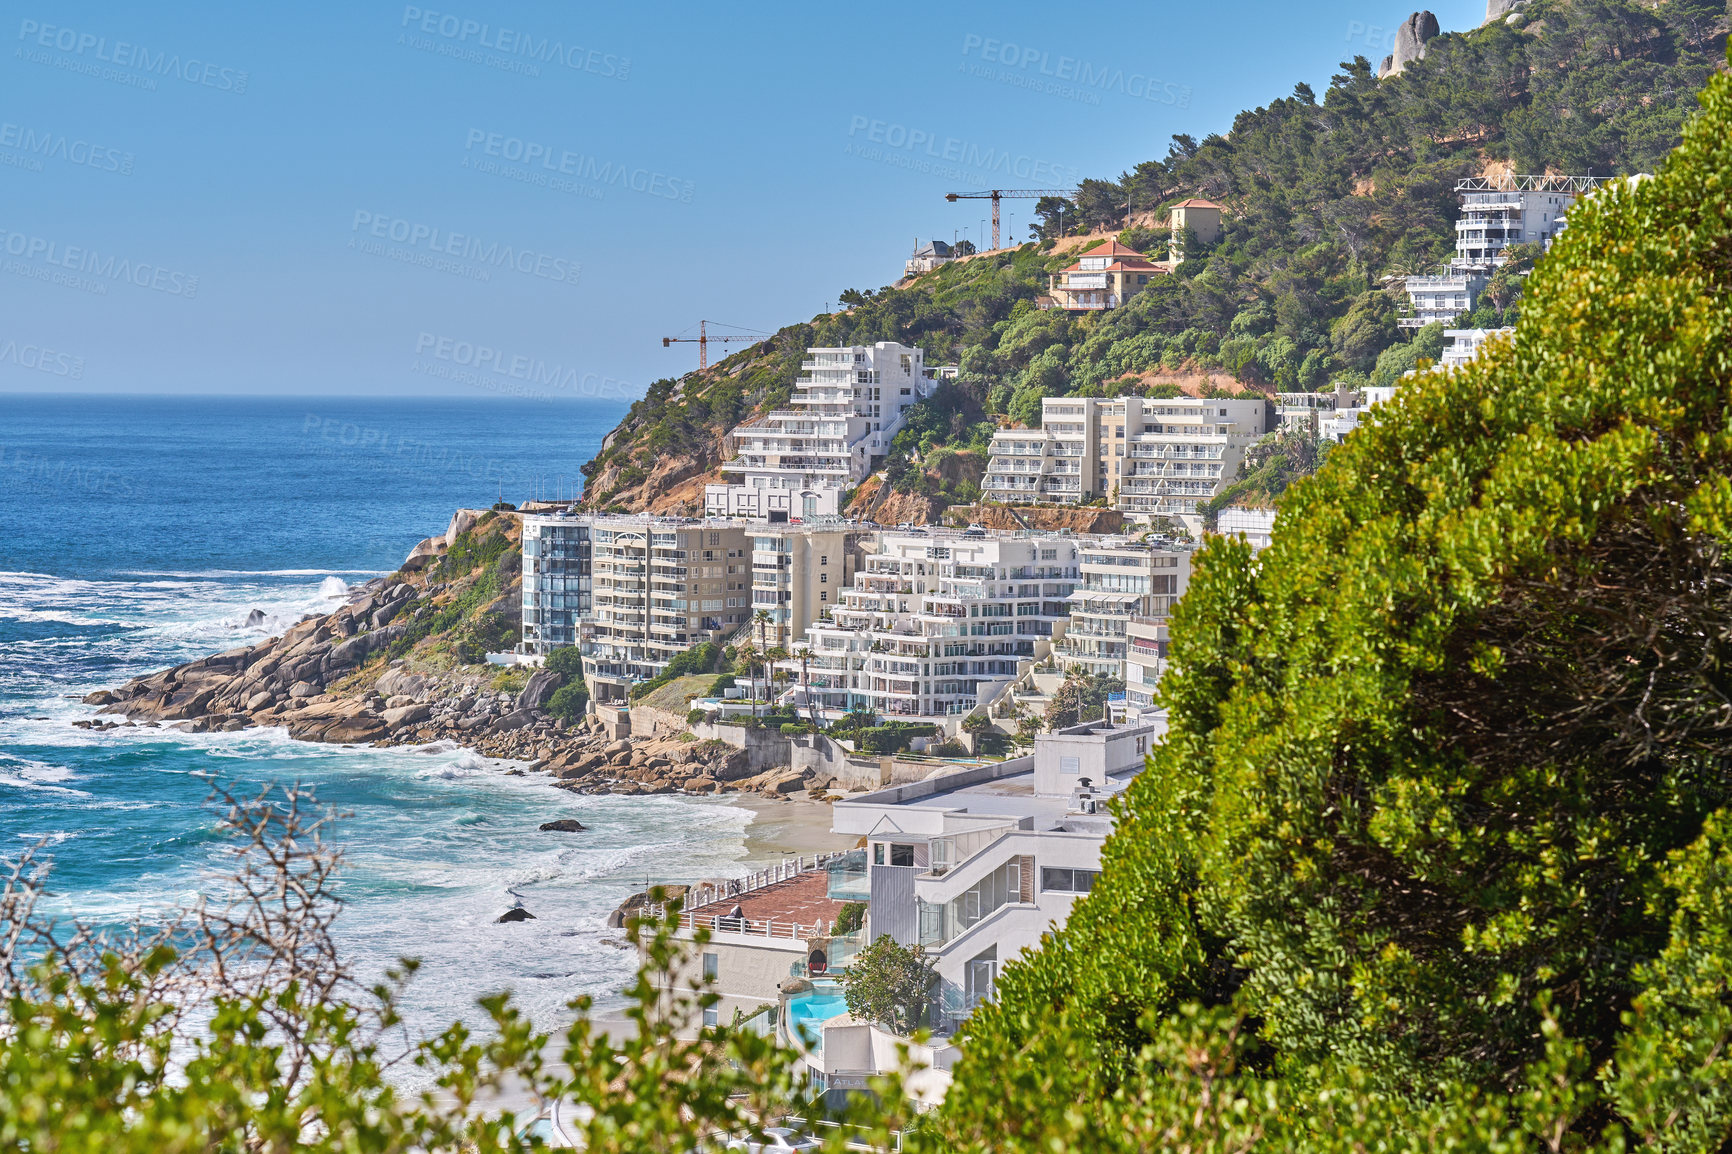 Buy stock photo Clifton, Cape Town, South Africa panorama seascape with clouds, blue sky, hotels, and apartment buildings in the background. Housing development overlooking the beautiful blue ocean peninsula